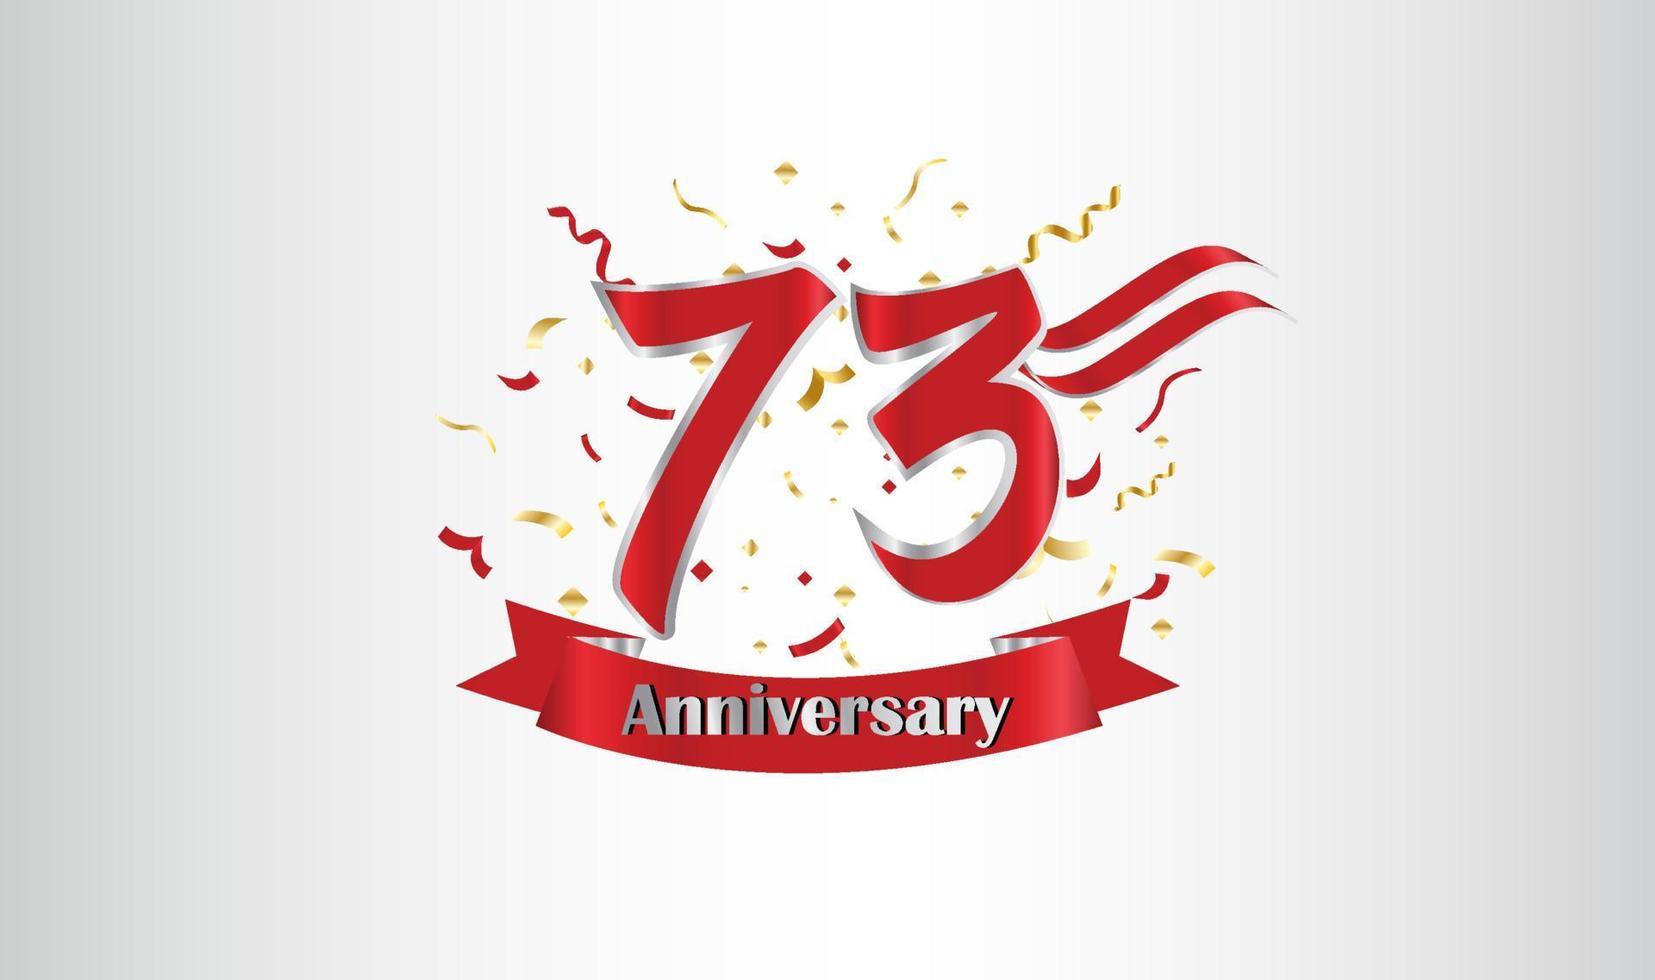 Anniversary celebration background. with the 73rd number in gold and with the words golden anniversary celebration. vector